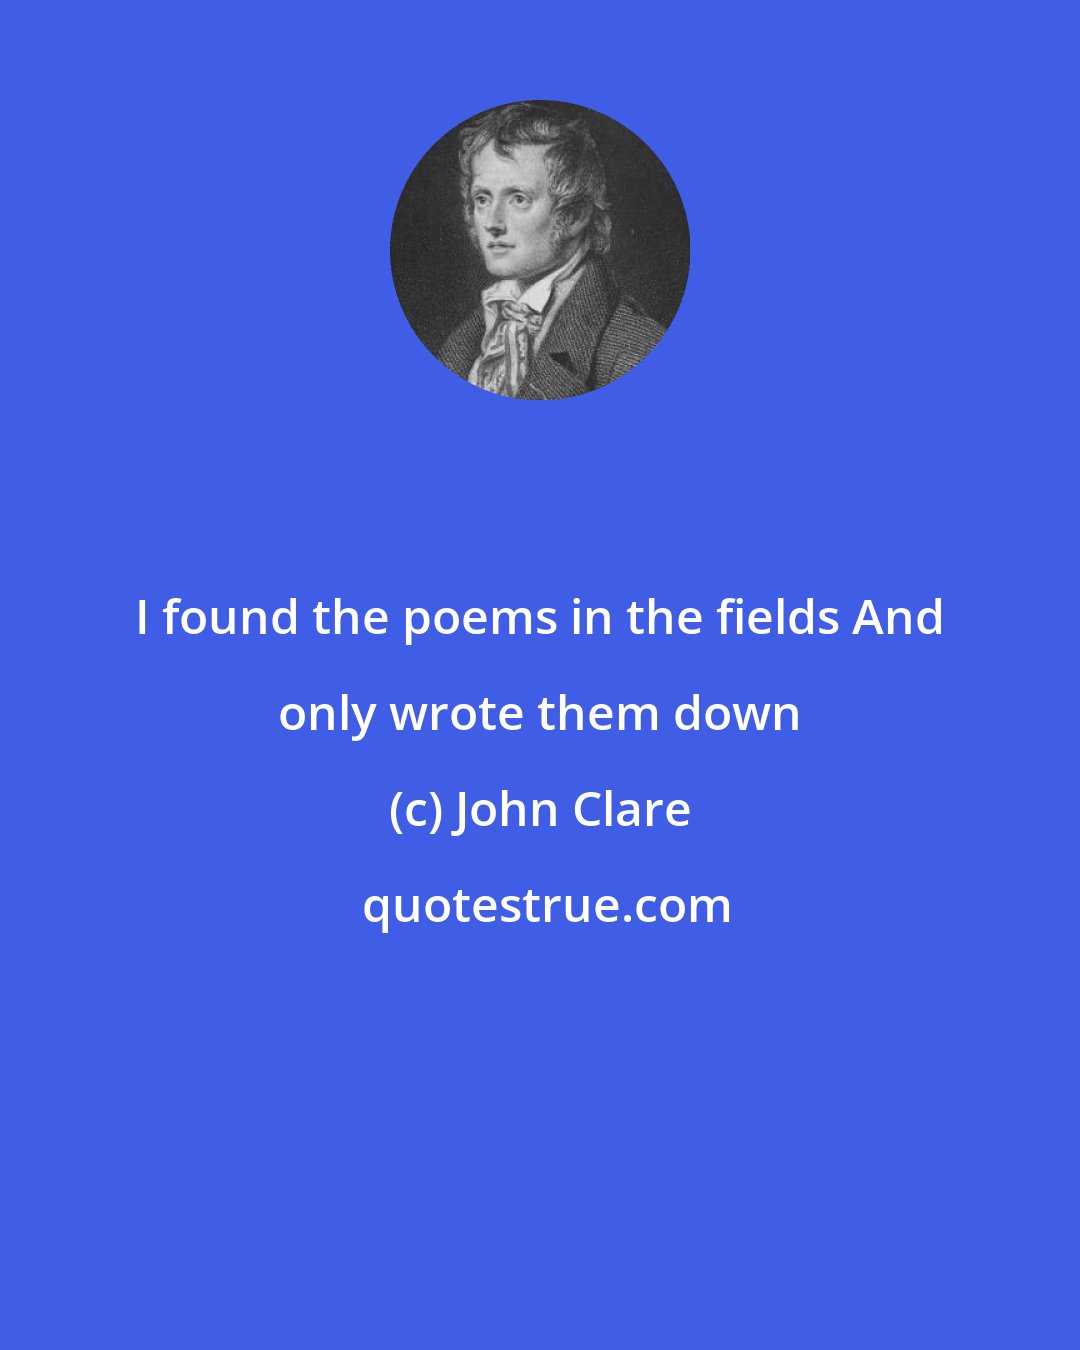 John Clare: I found the poems in the fields And only wrote them down